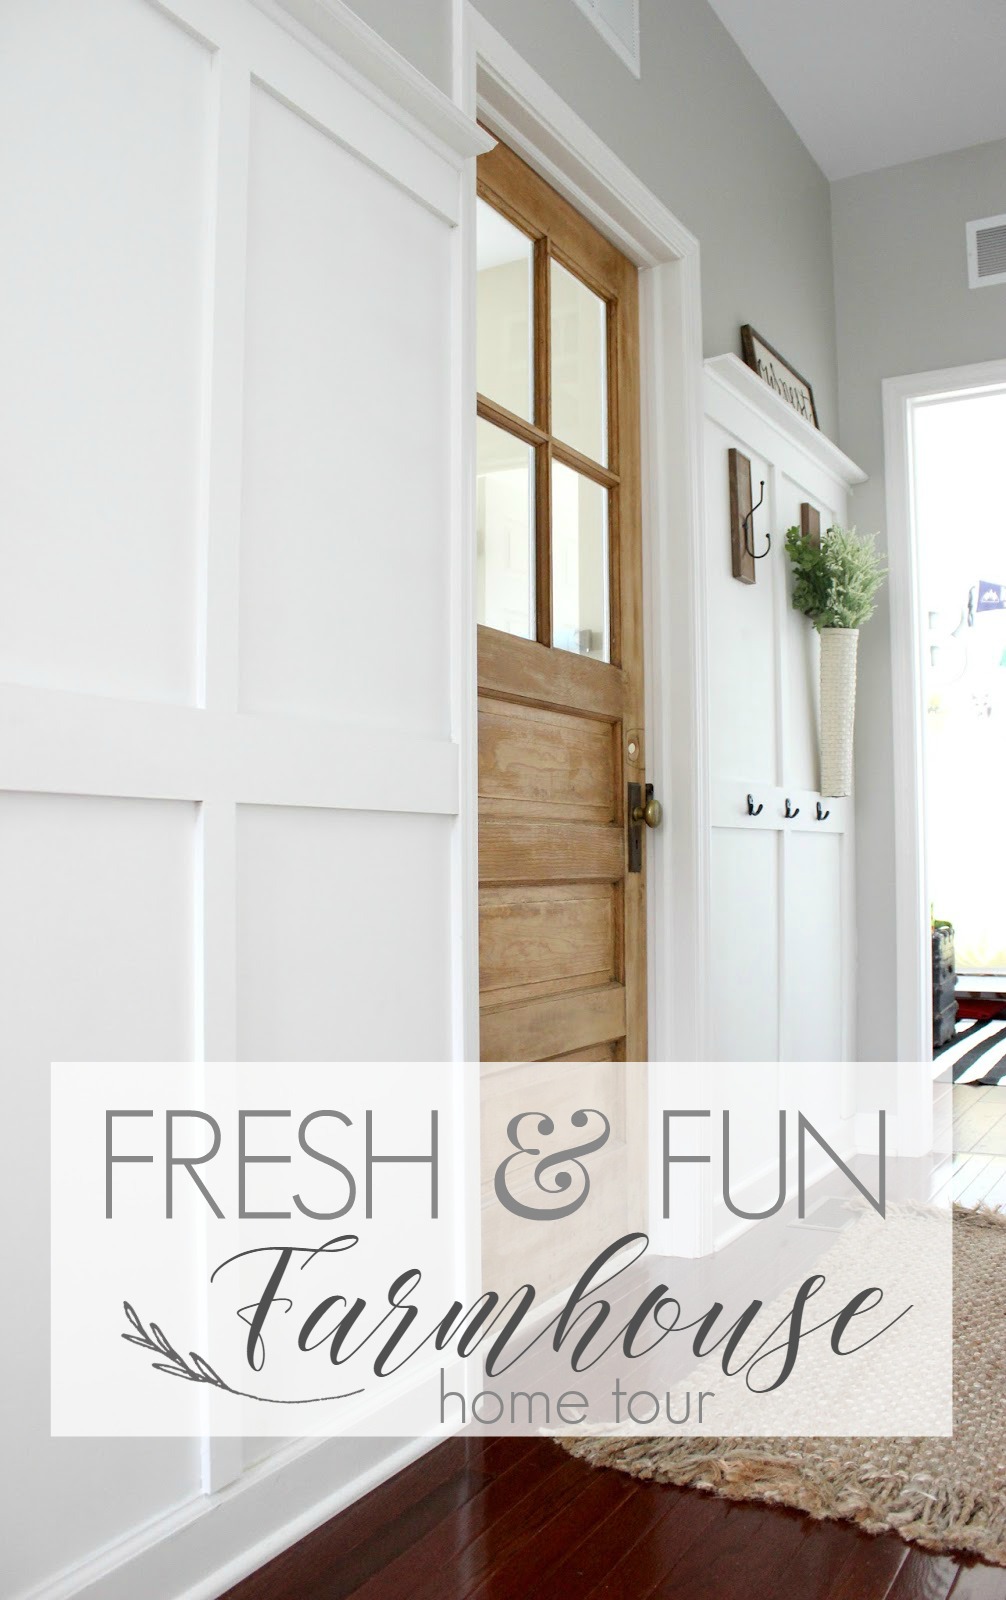 Take a Farmhouse Flavored Home Tour today! Shiplap and Board and Batten, along with Aqua Accents keep this Delightfully Noted Chicago home Fresh and Fun!